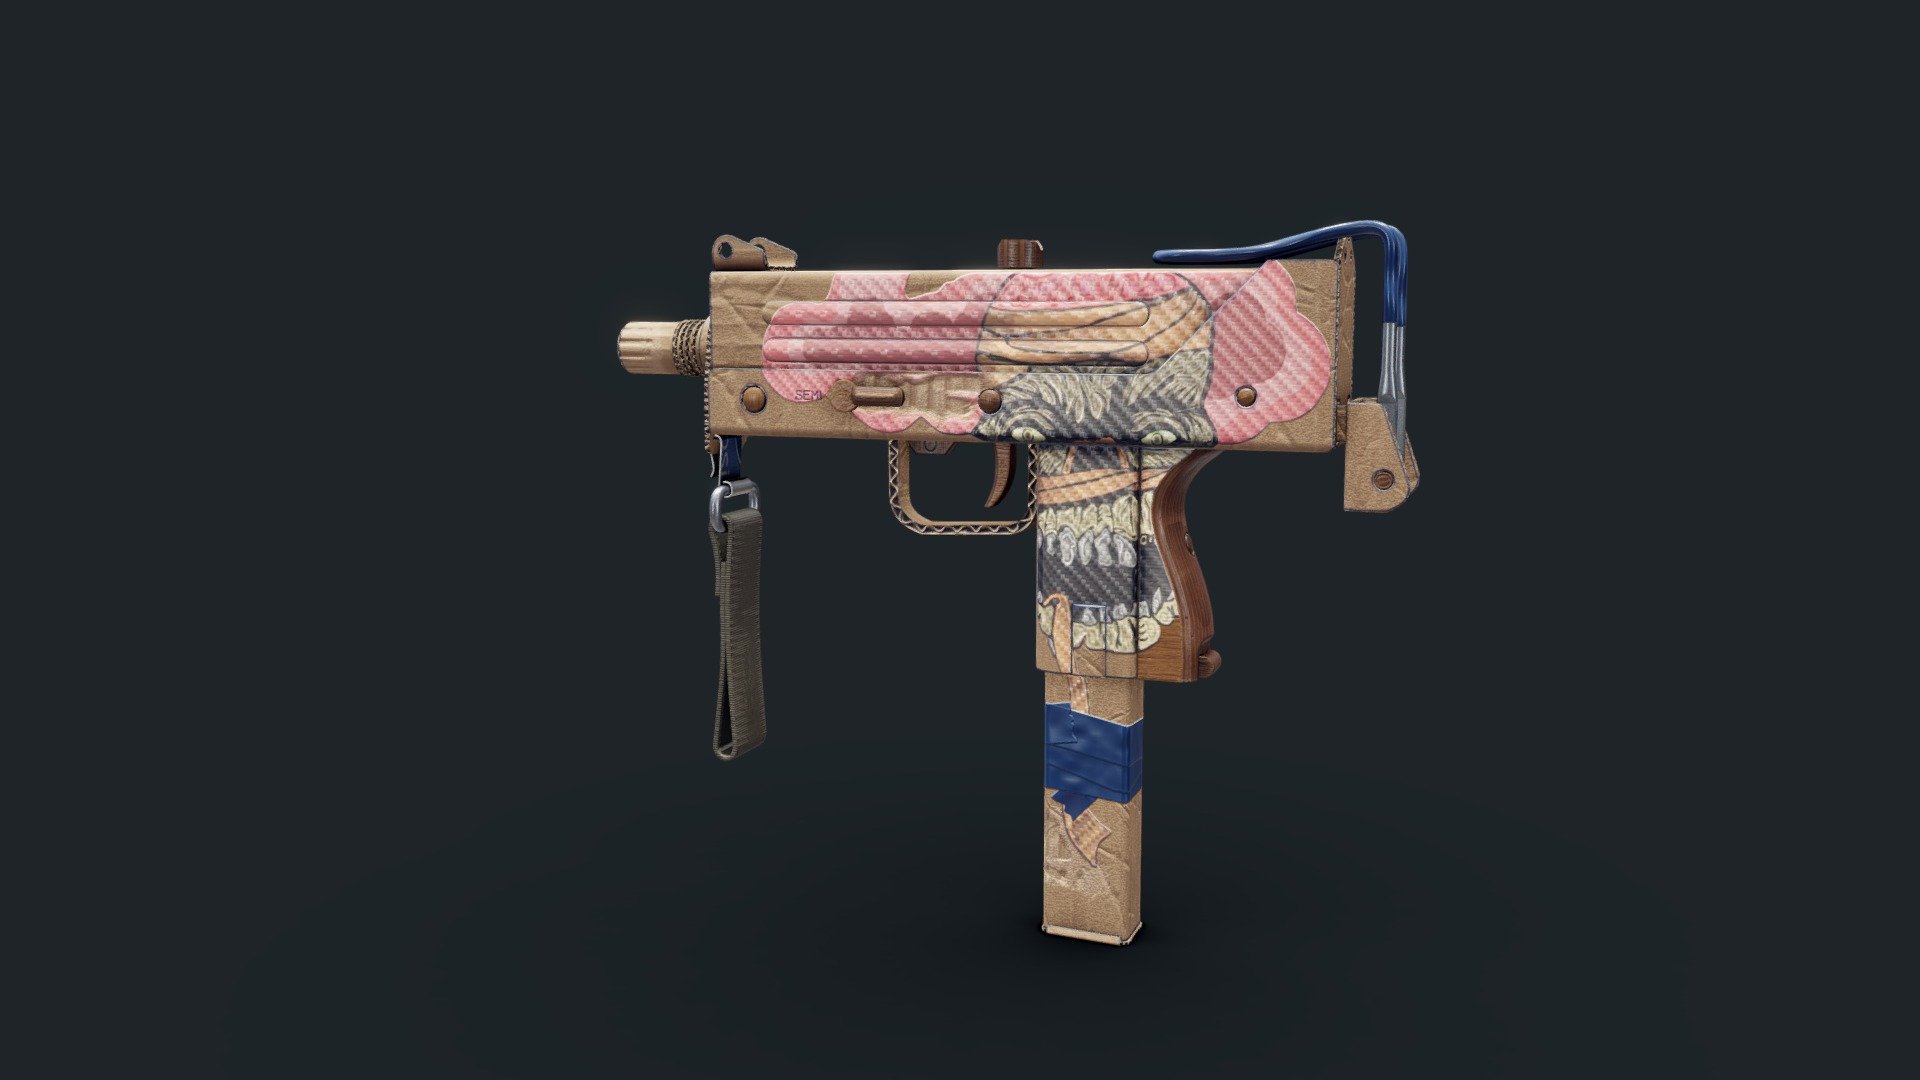 Cursed Stormthrasher cs go skin for apple download free